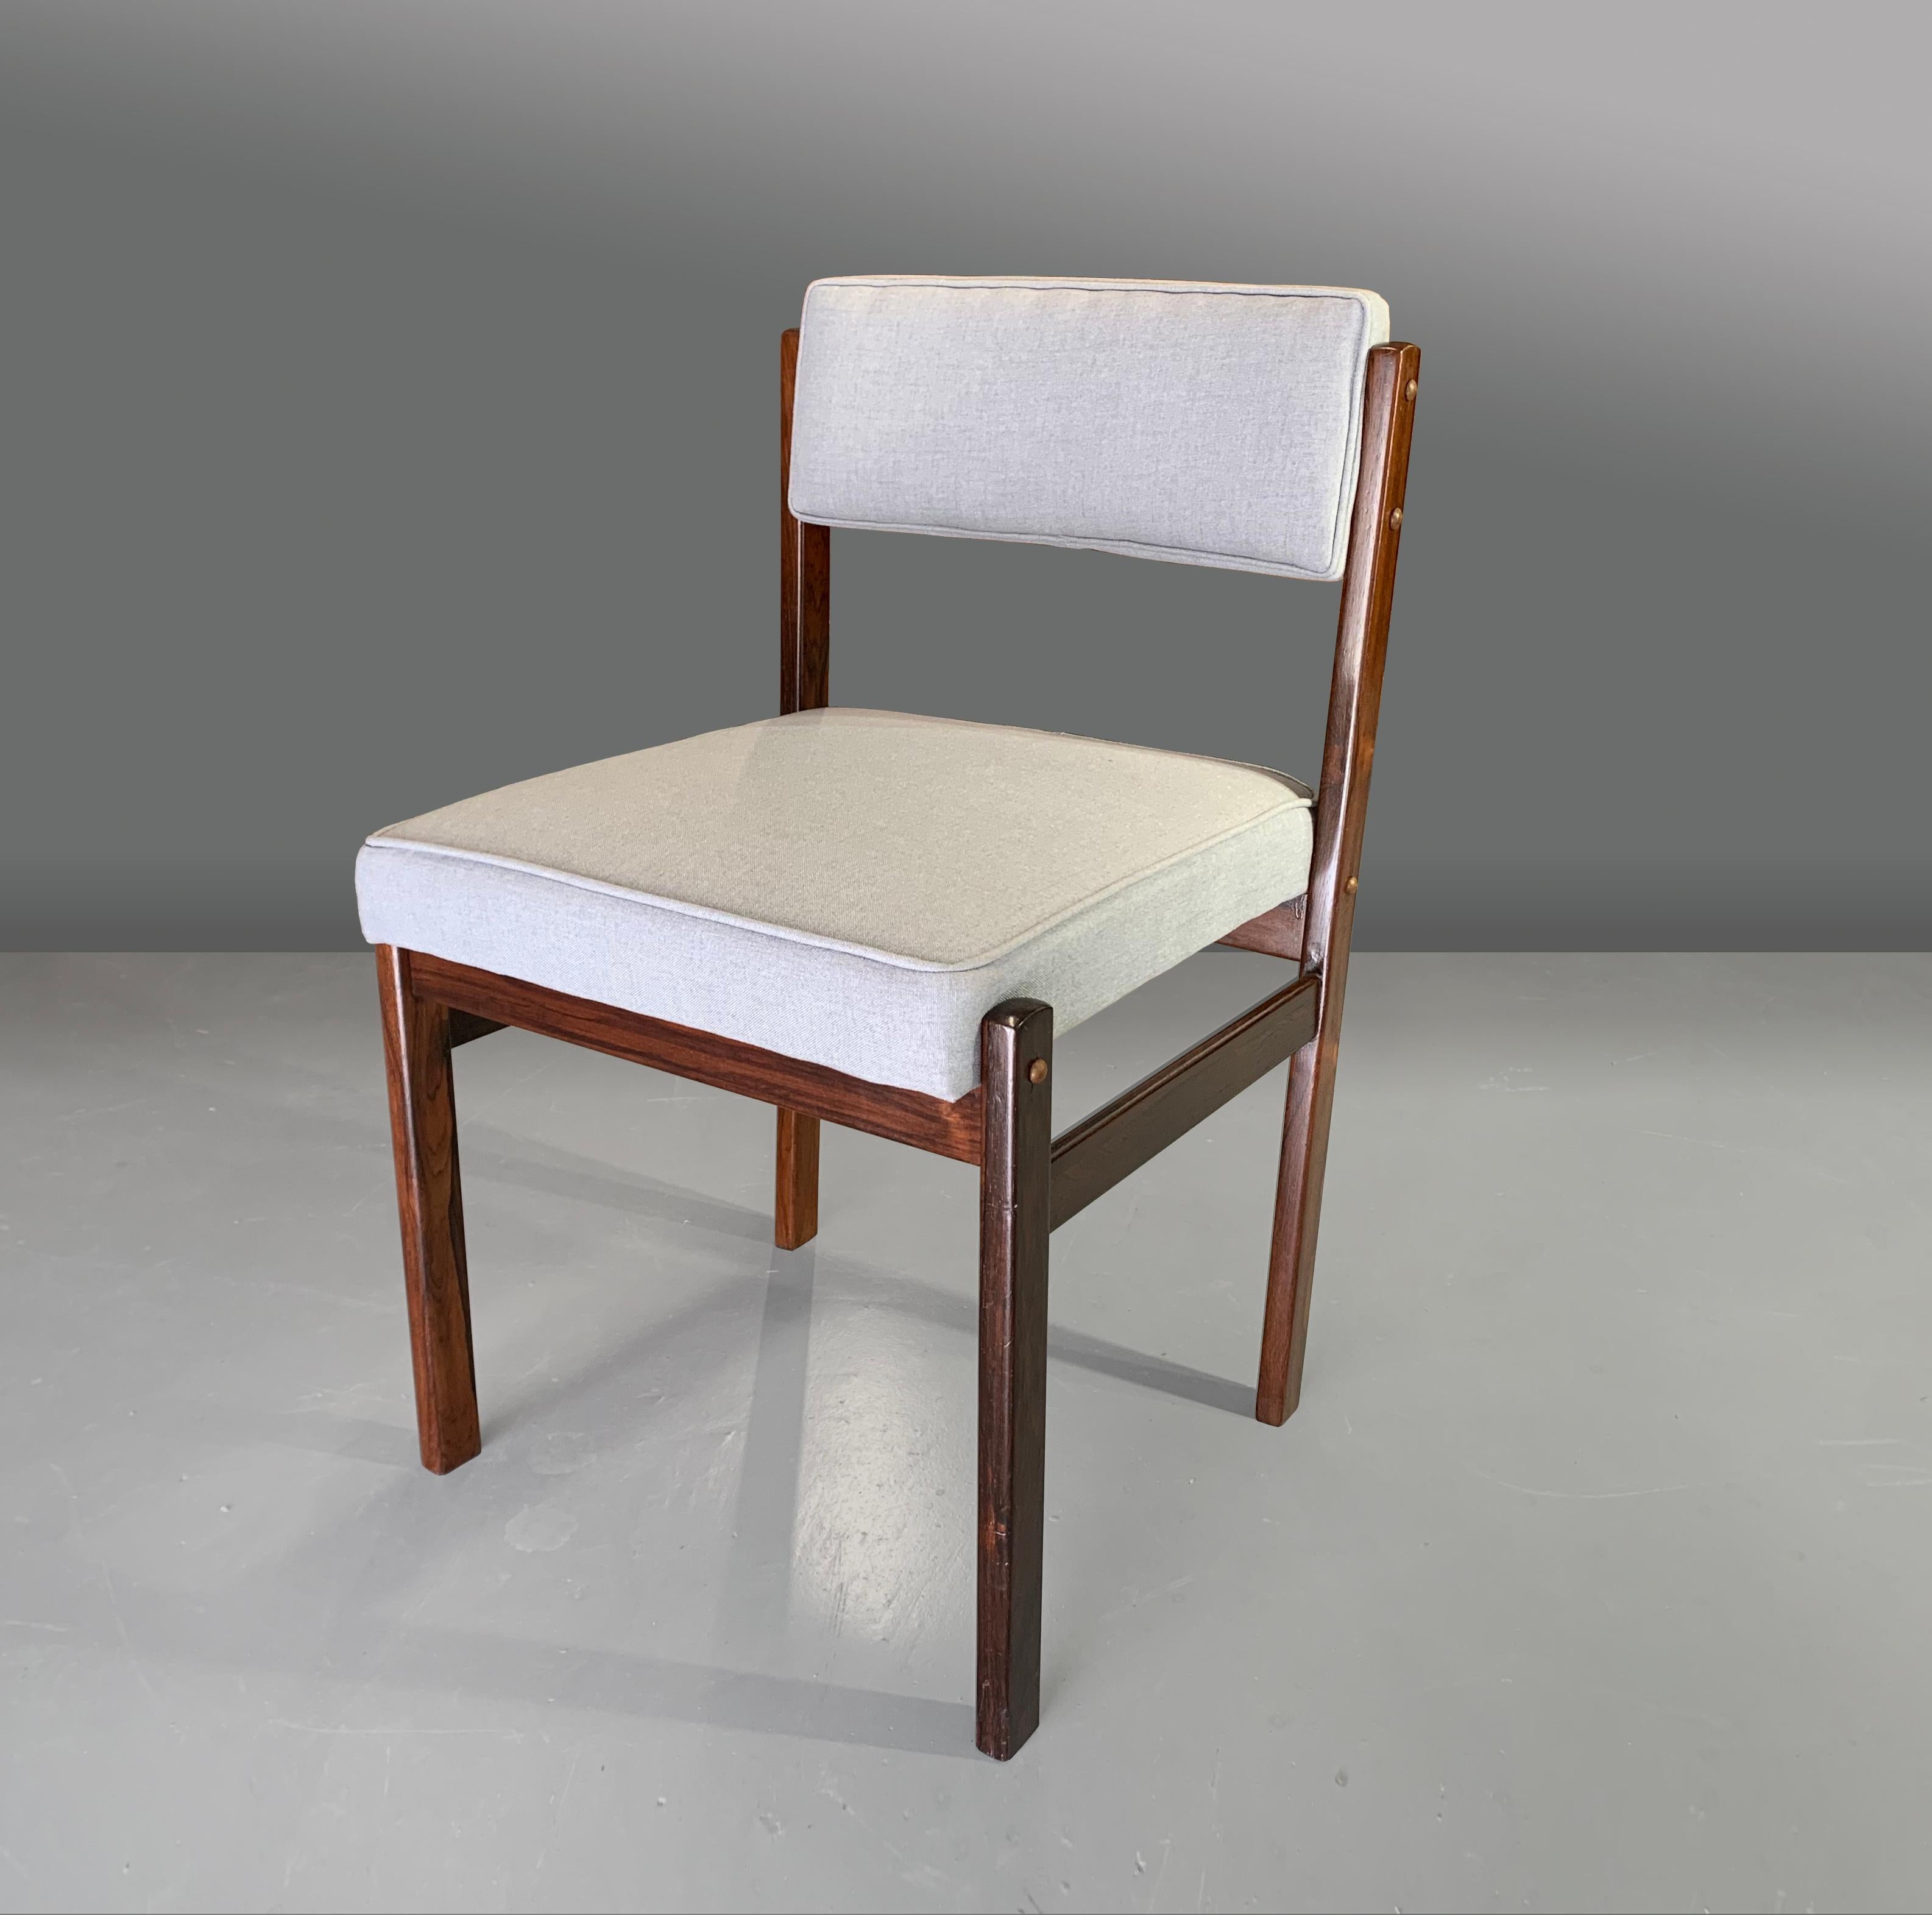 Sergio Rodrigues
Tião dining chair, Brazil 1959

Tião is a comfortable, classic and elegant chair designed by Sergio Rodrigues in 1959, and manufactured by Oca.

We have a set of eight Tião chairs in dark solid hardwood frame, re-upholstered in a